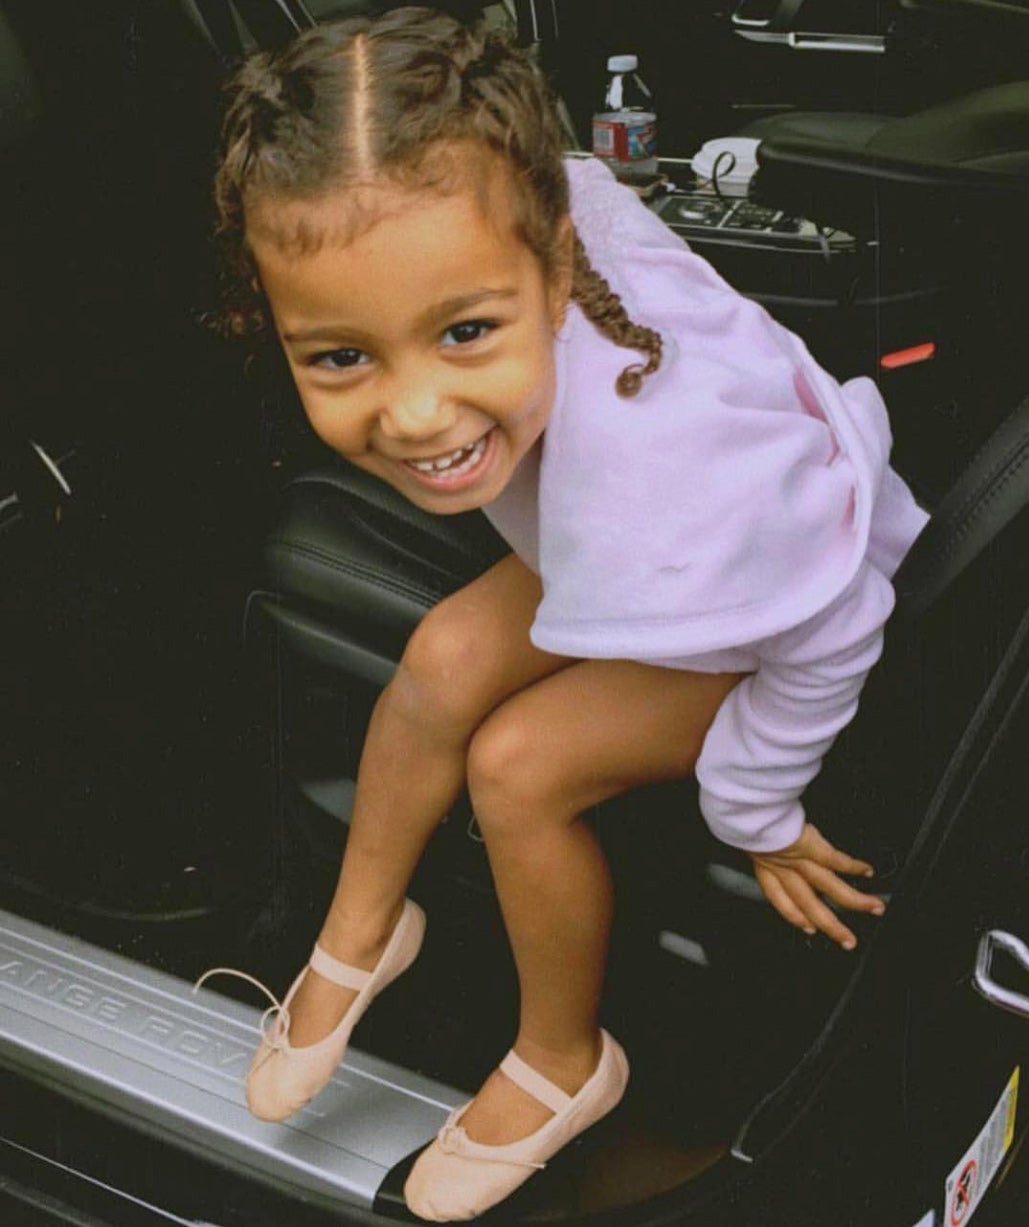 North West Makes Modeling Debut, Appears In Her First Fashion Campaign
